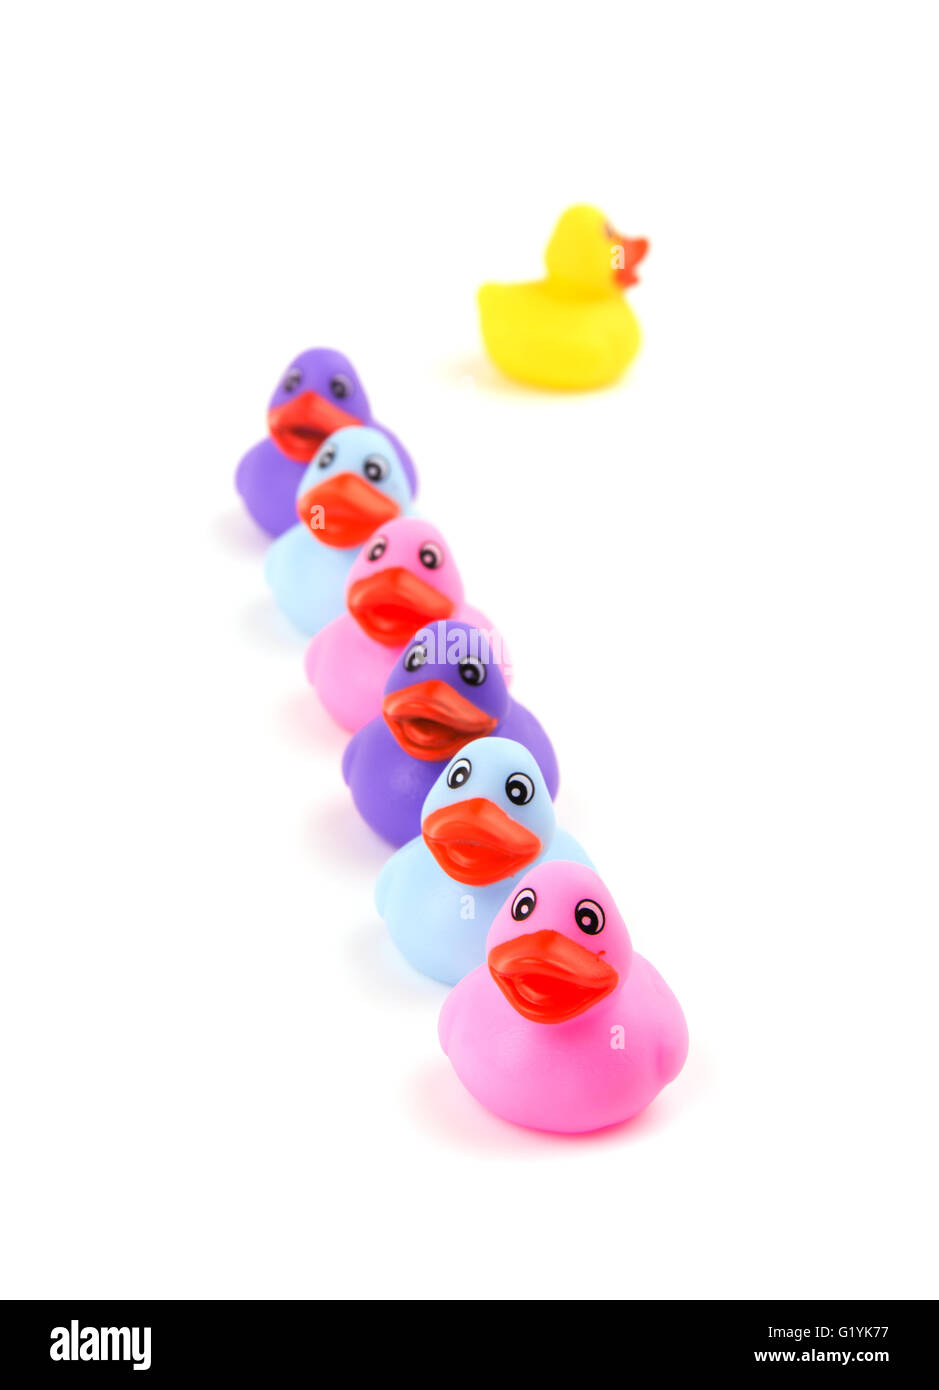 Rubber ducks in a row, with one headed to opposite direction, fading away - concept of individuality; focus on front pink duck Stock Photo